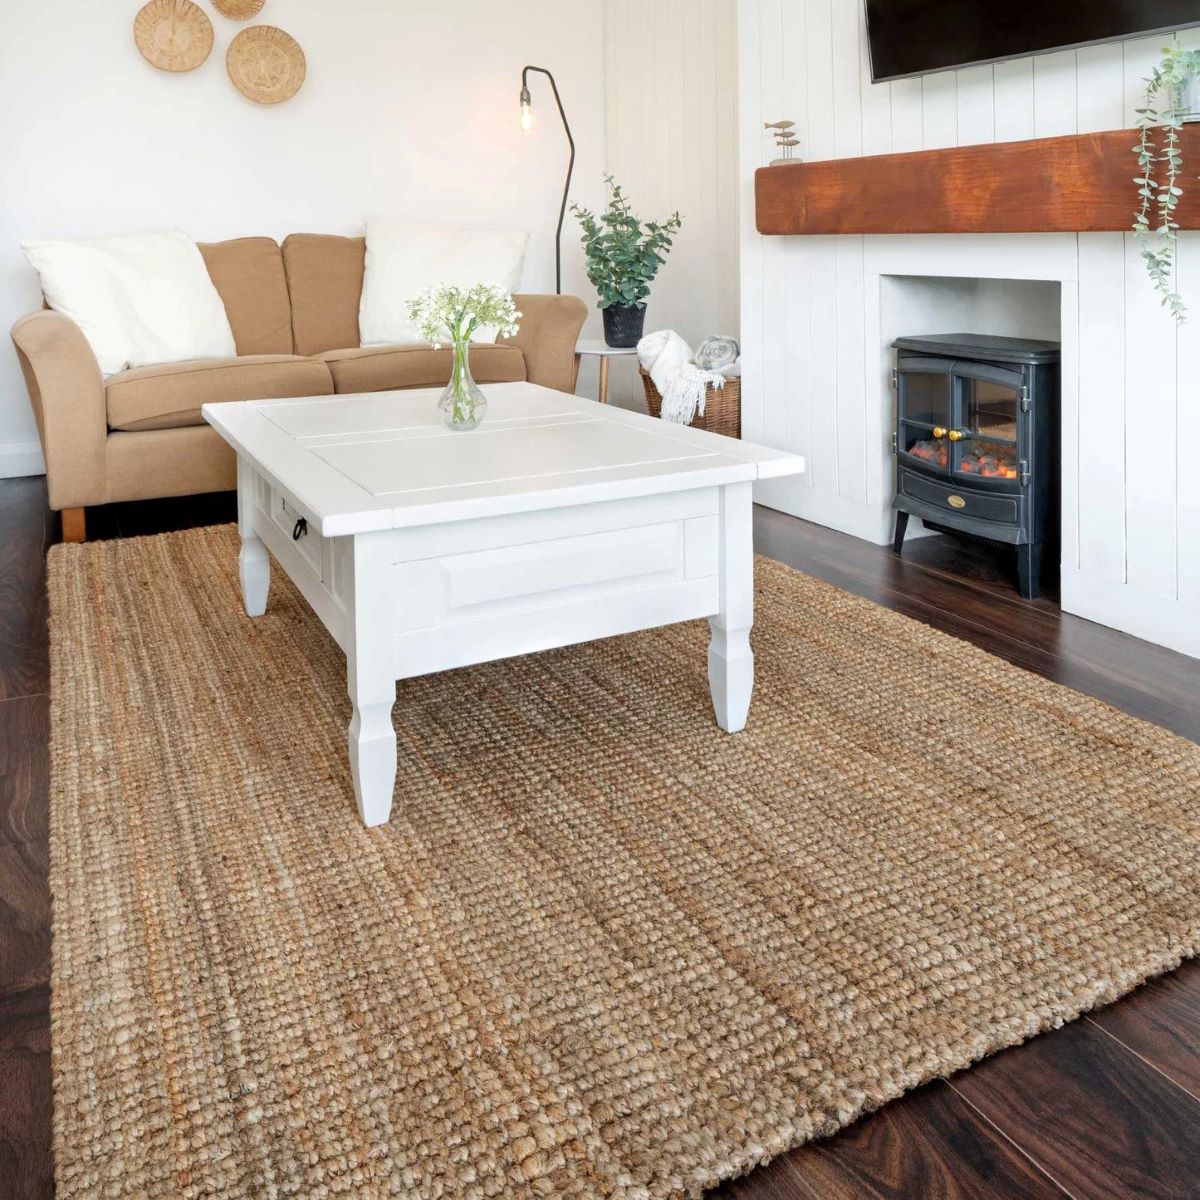 What Are Jute Rugs Good For